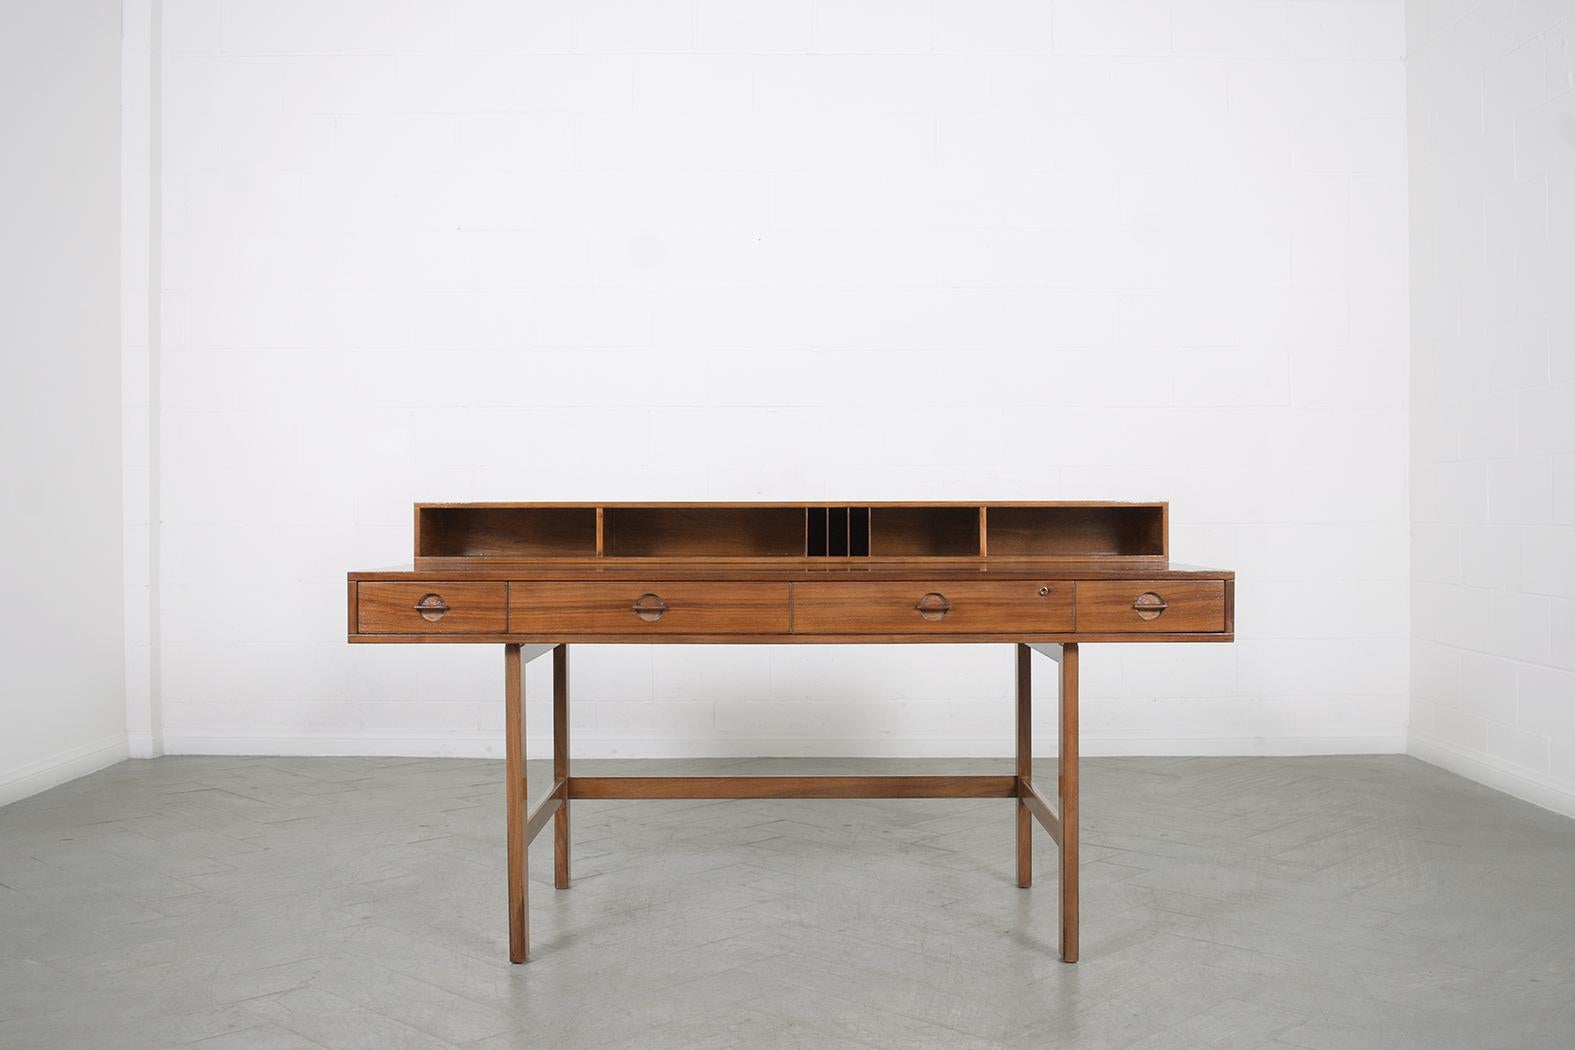 This extraordinary danish modern teak desk was designed and crafted by the iconic Peter Løvig Nielsen in Denmark circa the 1970s. Its ingenious design makes it versatile in accommodating two persons on each side by simply flipping the top shelf and